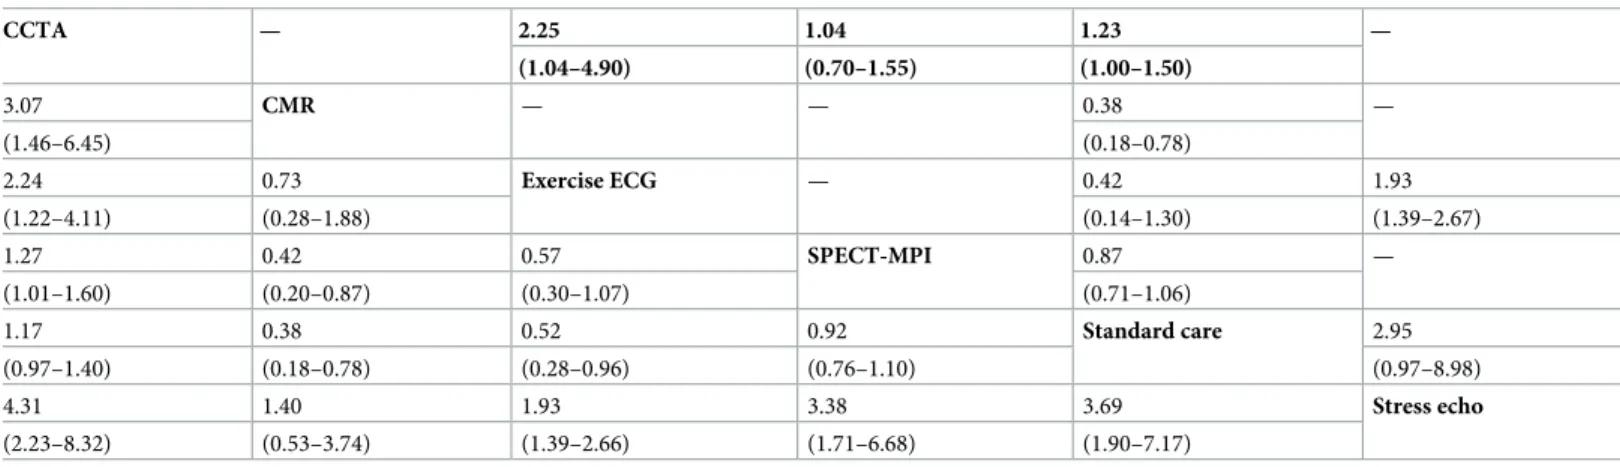 Table 1. Results from pairwise (upper triangle) and network (lower triangle) meta-analysis from the network of non-invasive diagnostic strategies for the detection of coronary artery disease in Fig 1A.